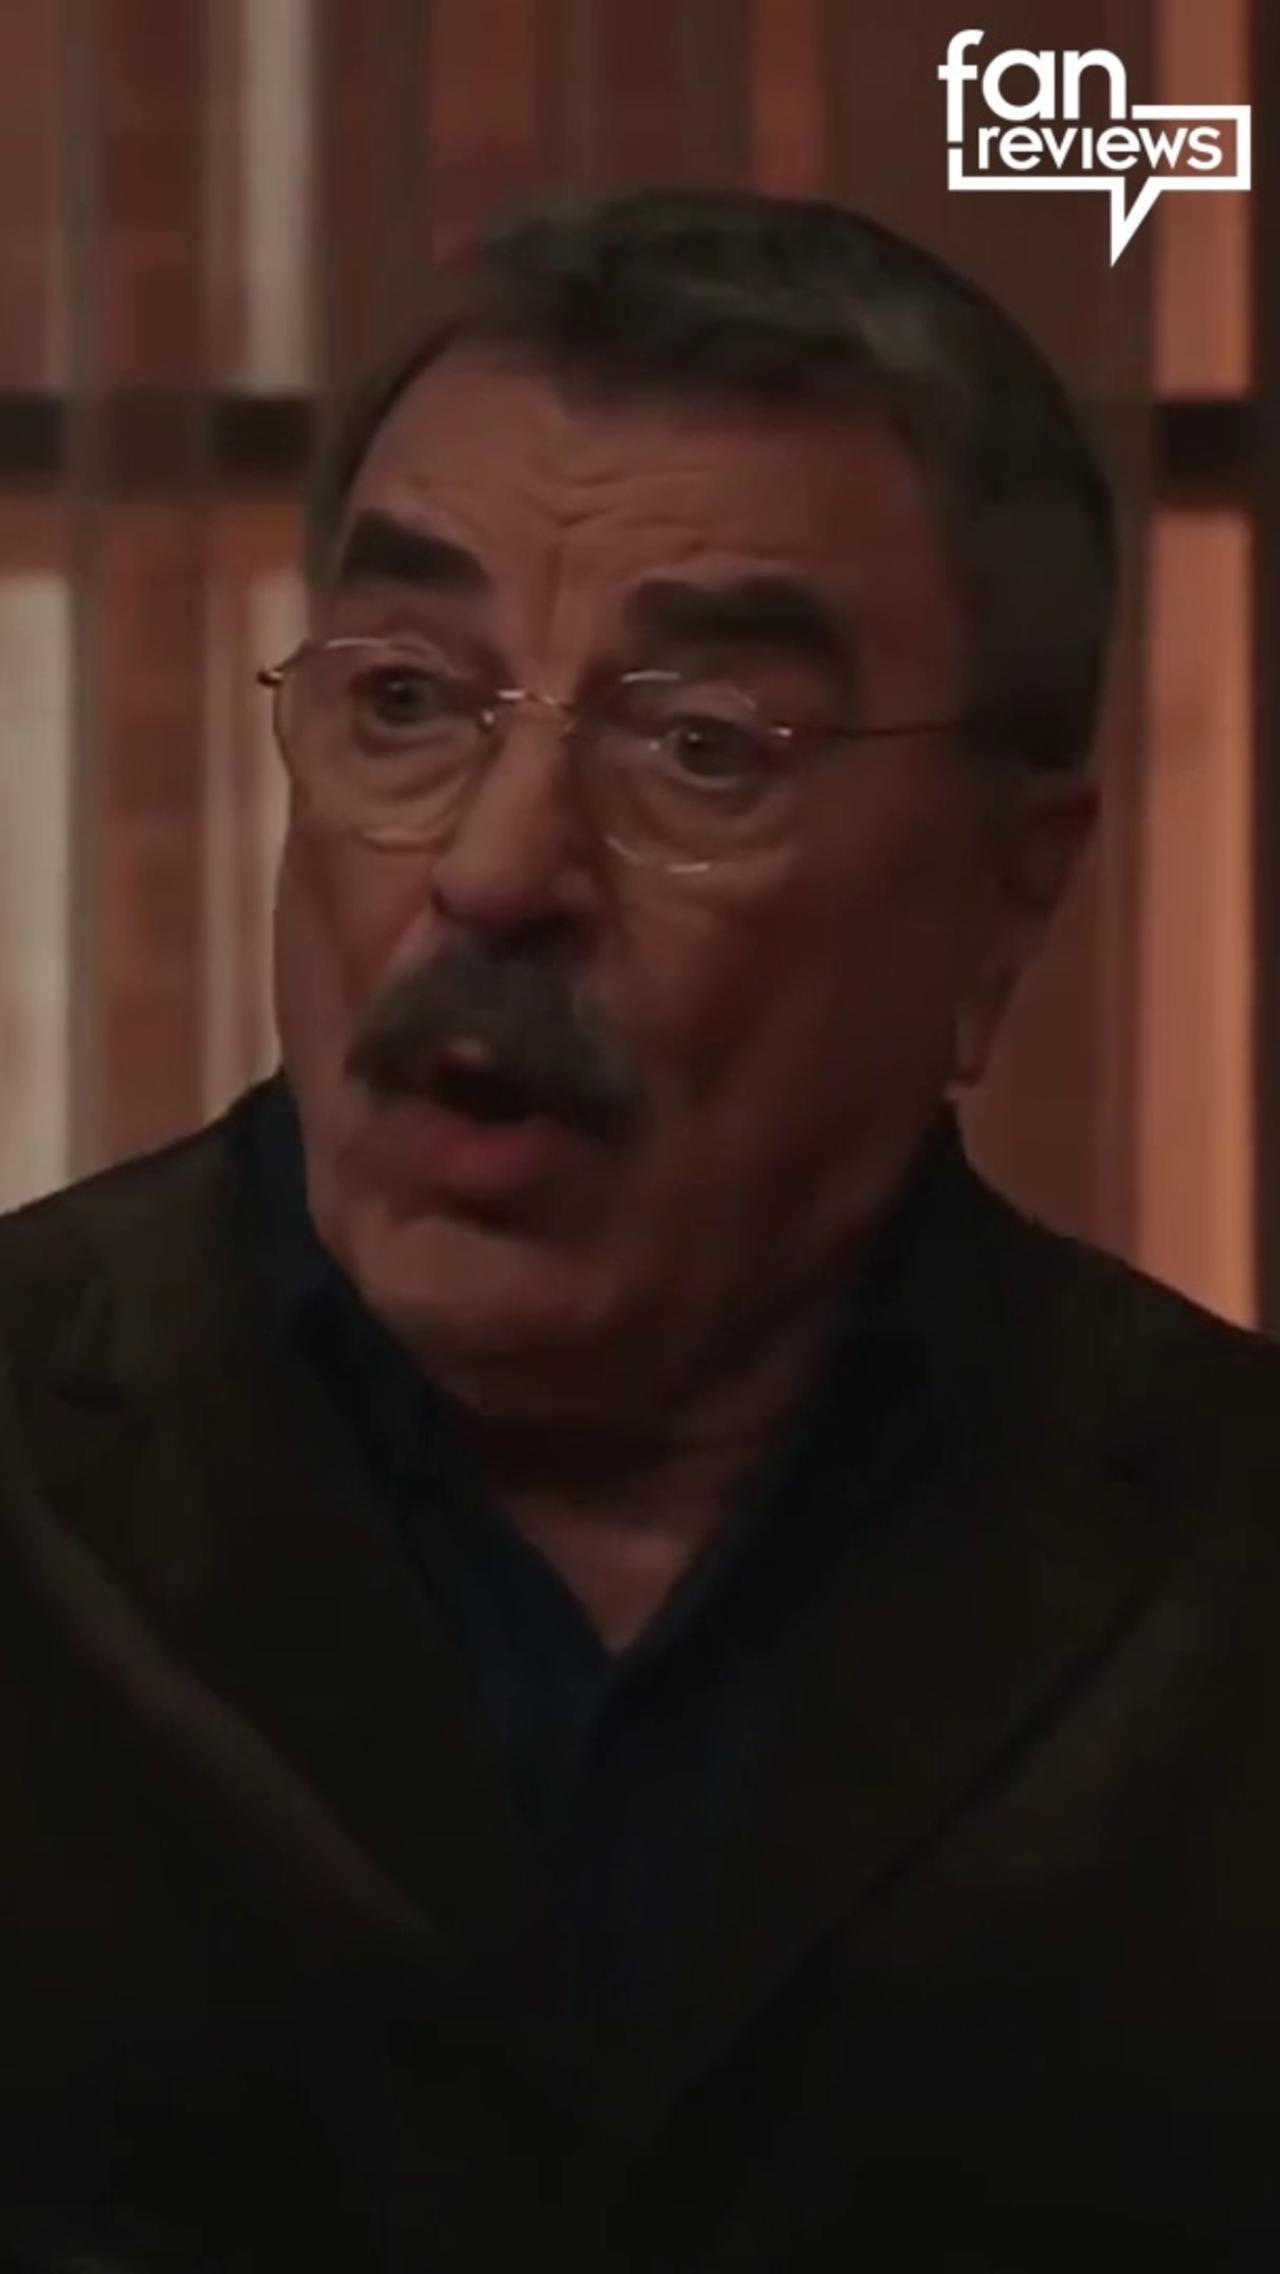 The Crazy One on CBS' #BlueBloods with #TomSelleck